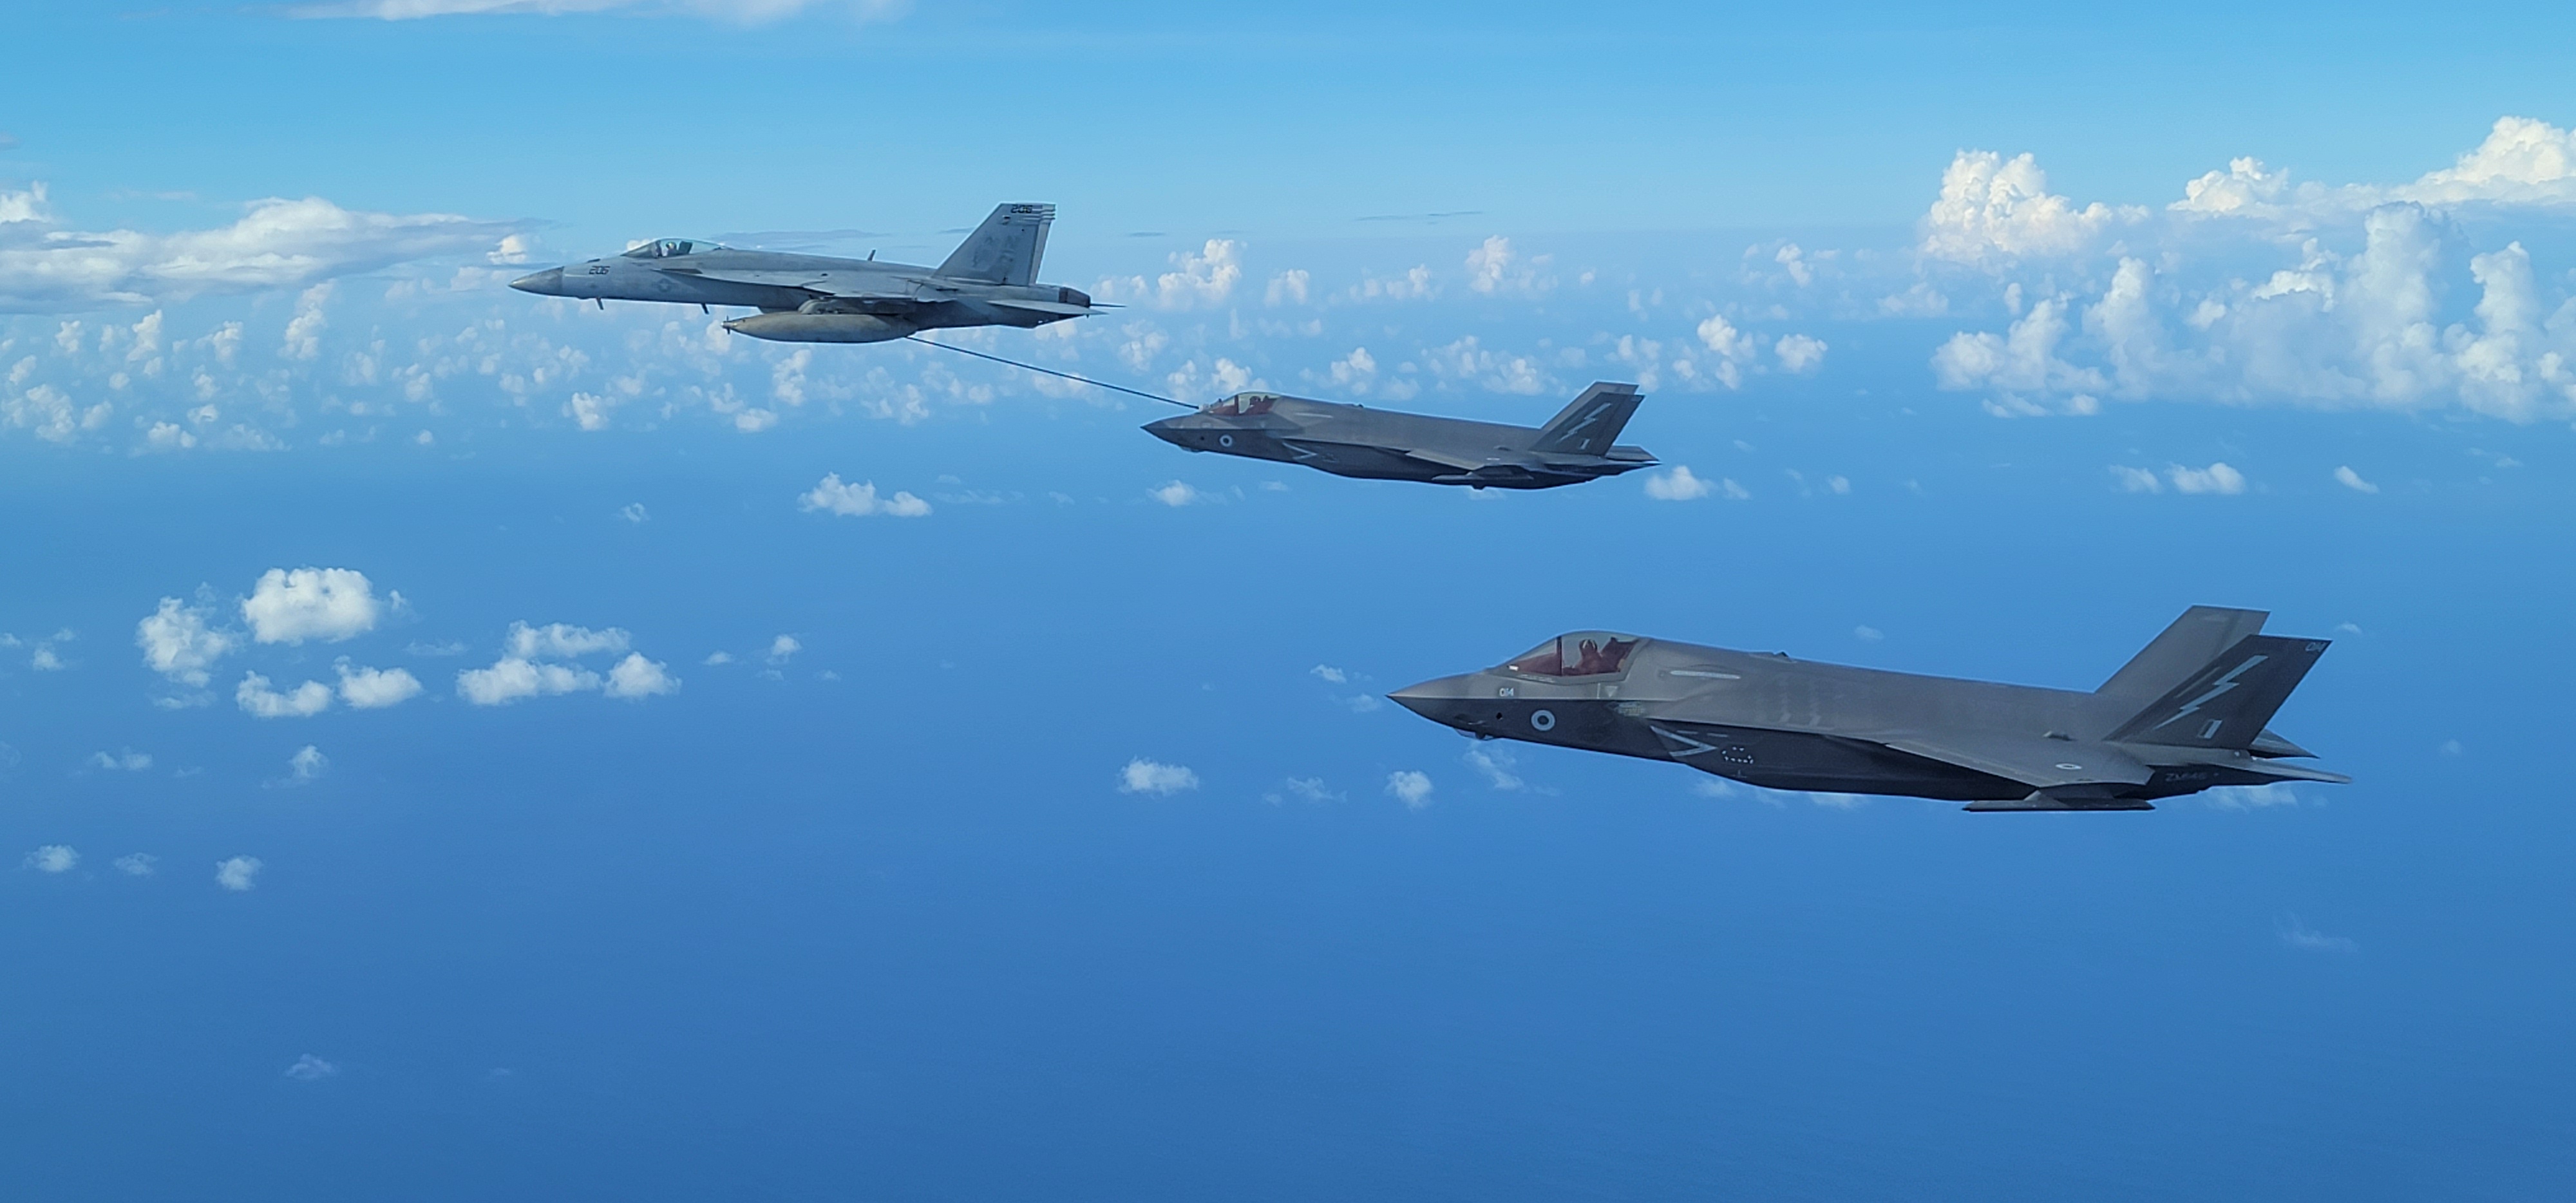 Two F-35B Lightnings and US Navy F/A-18E Super Hornet in flight.